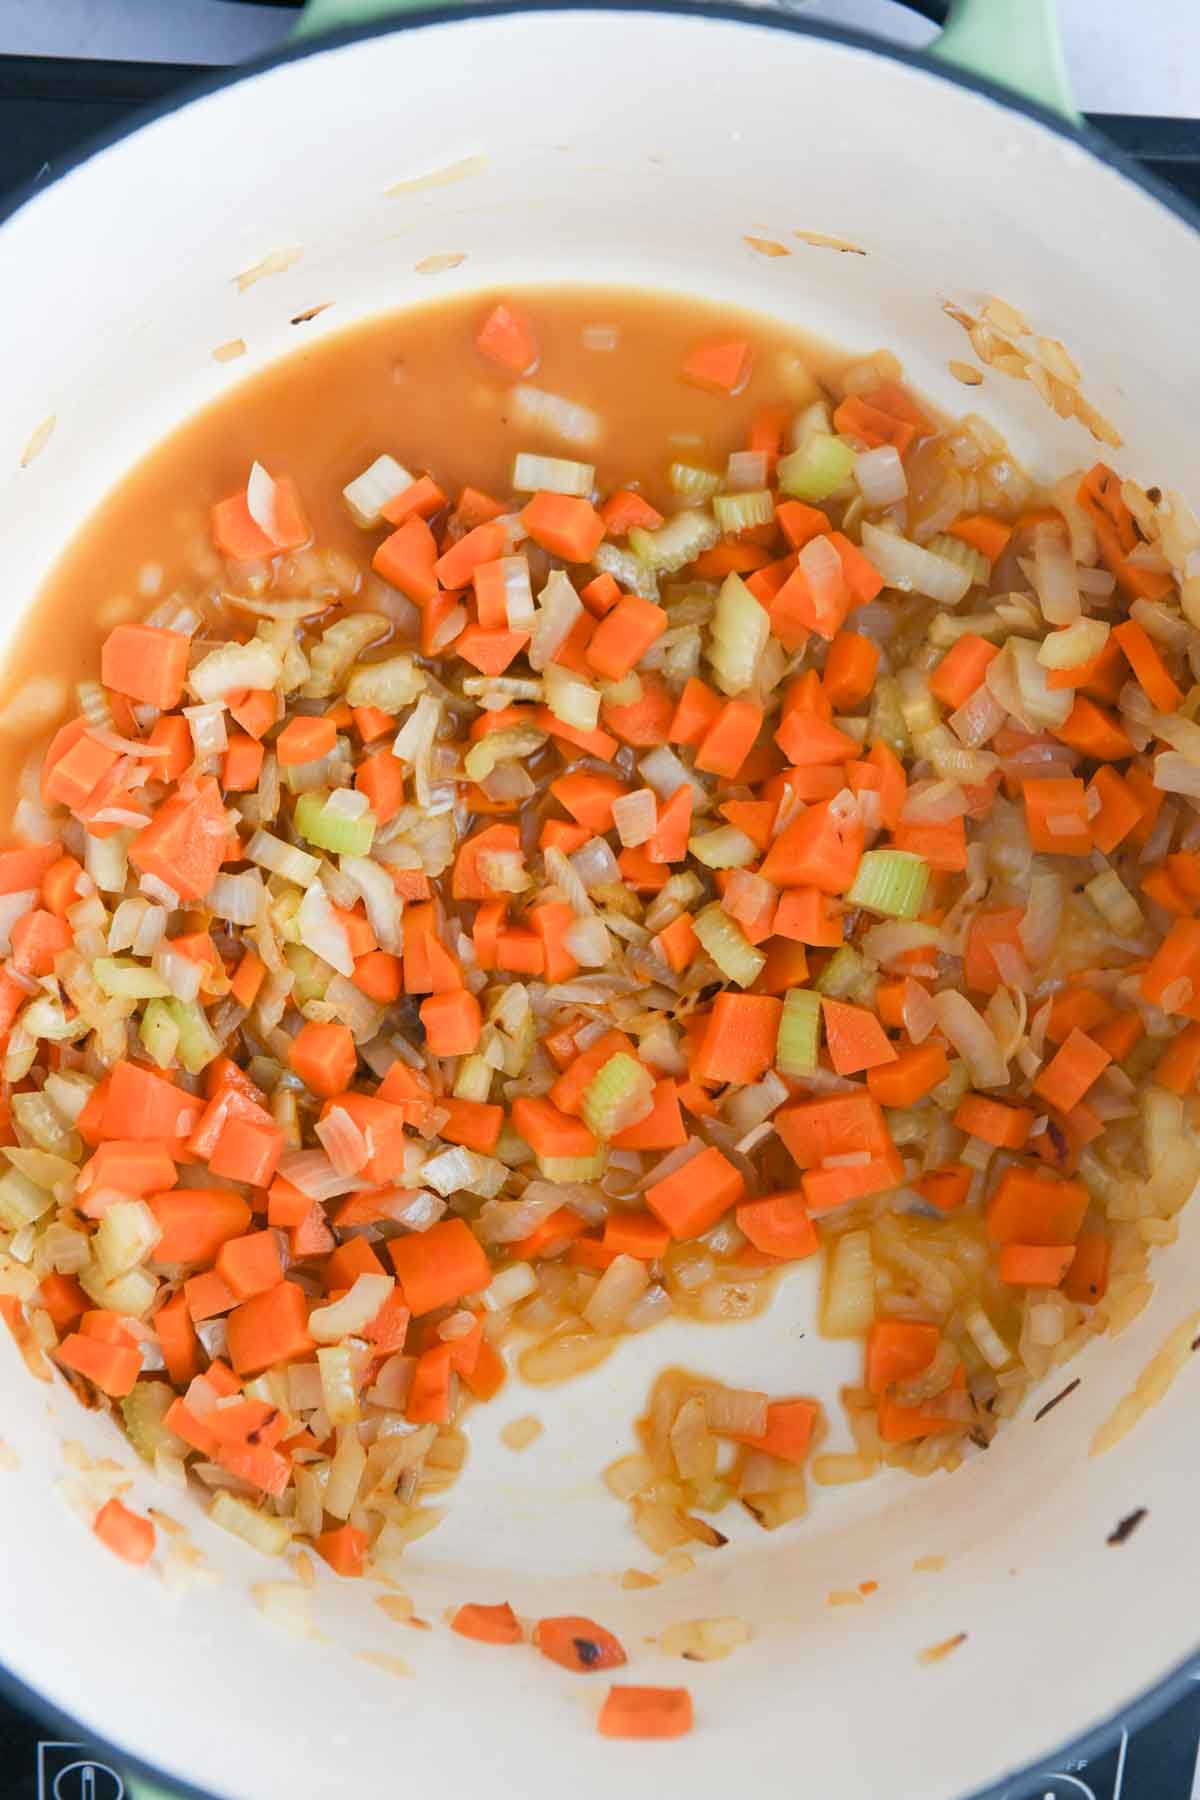 Sauteed onions, carrots, garlic, and celery in a white pot.